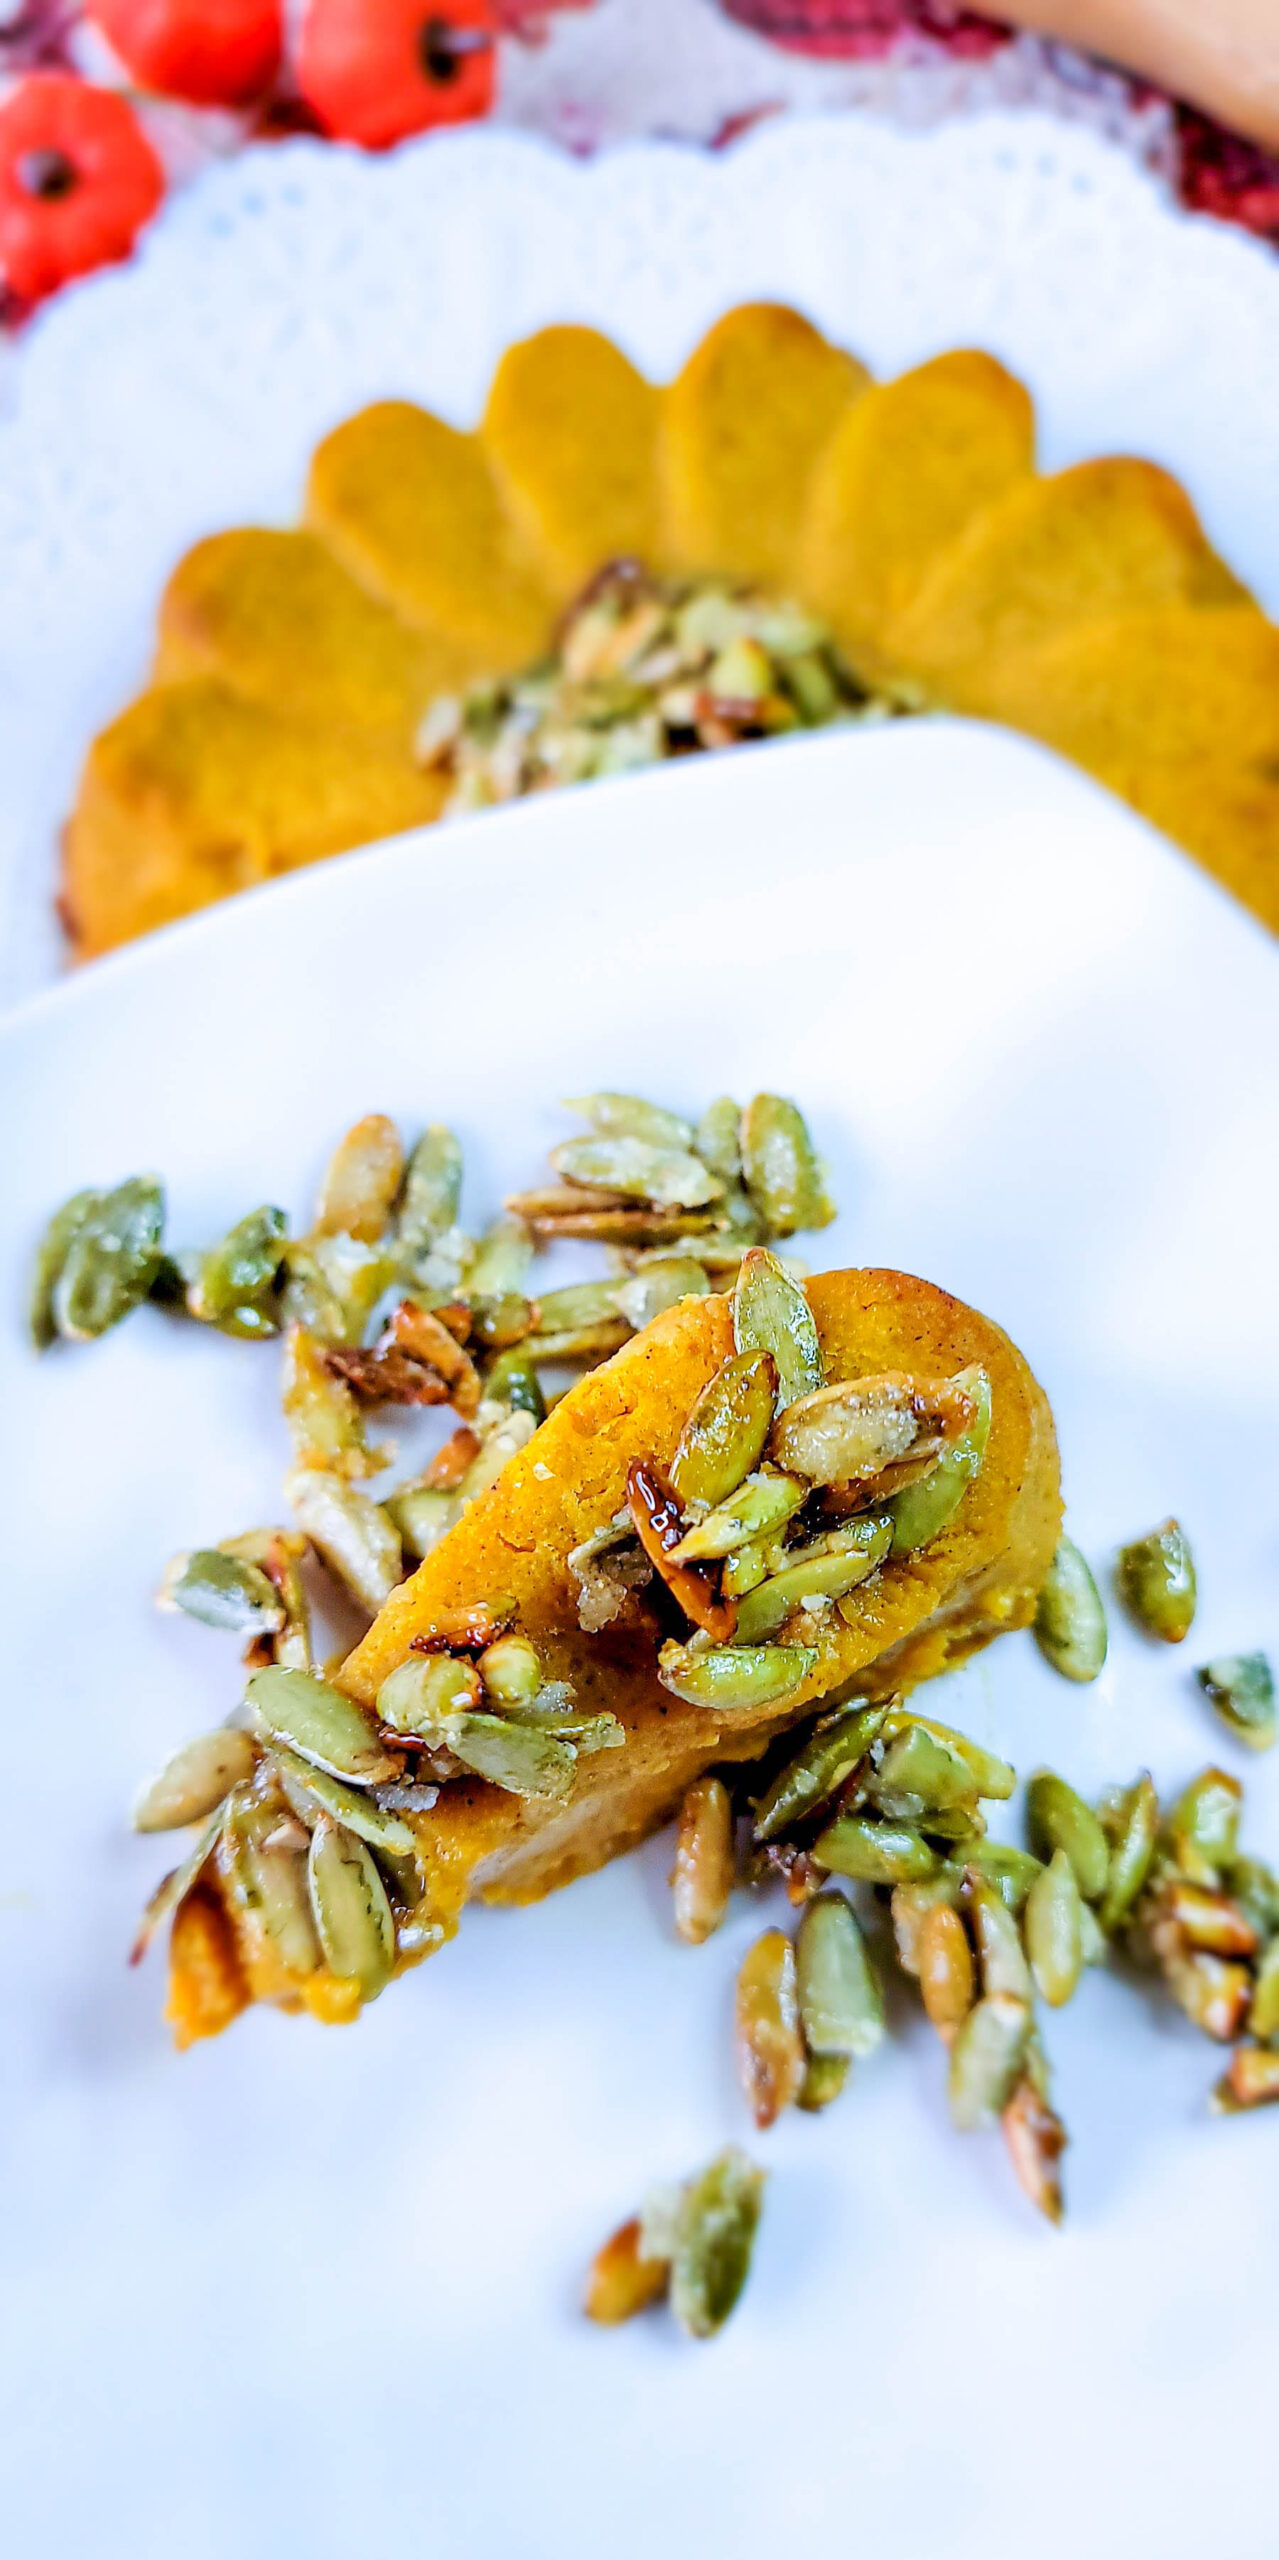 Pumpkin Spice Squash Kugel with Candied Pumpkin Seed Topping